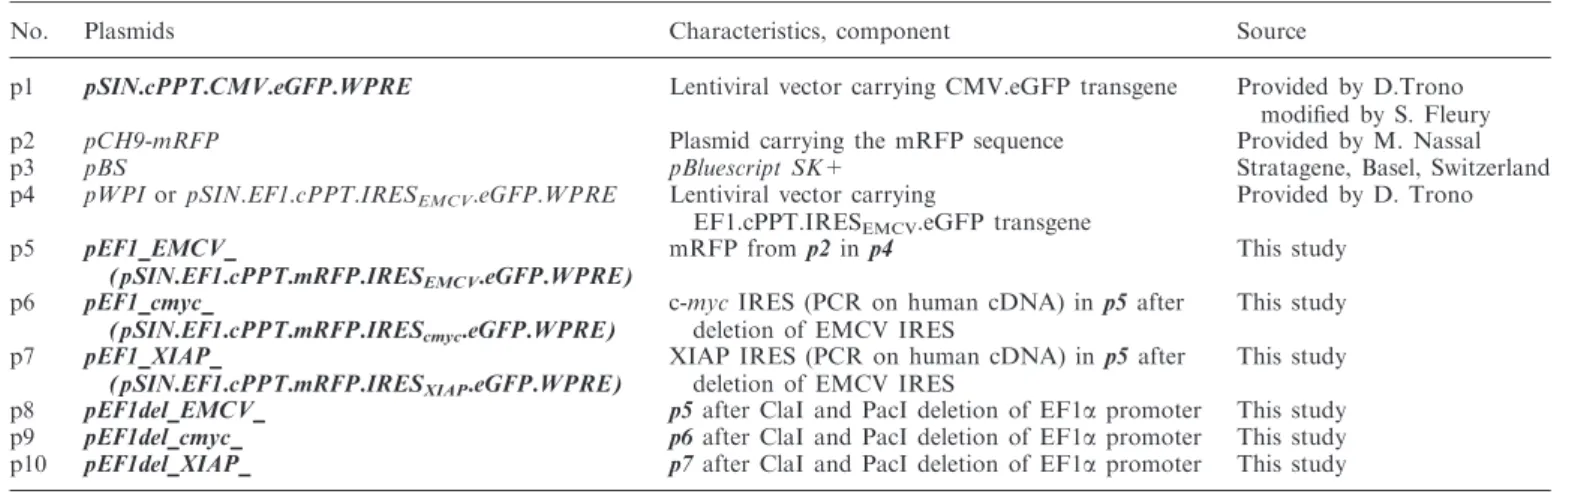 Table 1. Plasmids used in this study: ﬁnal (in bold) and intermediate constructs